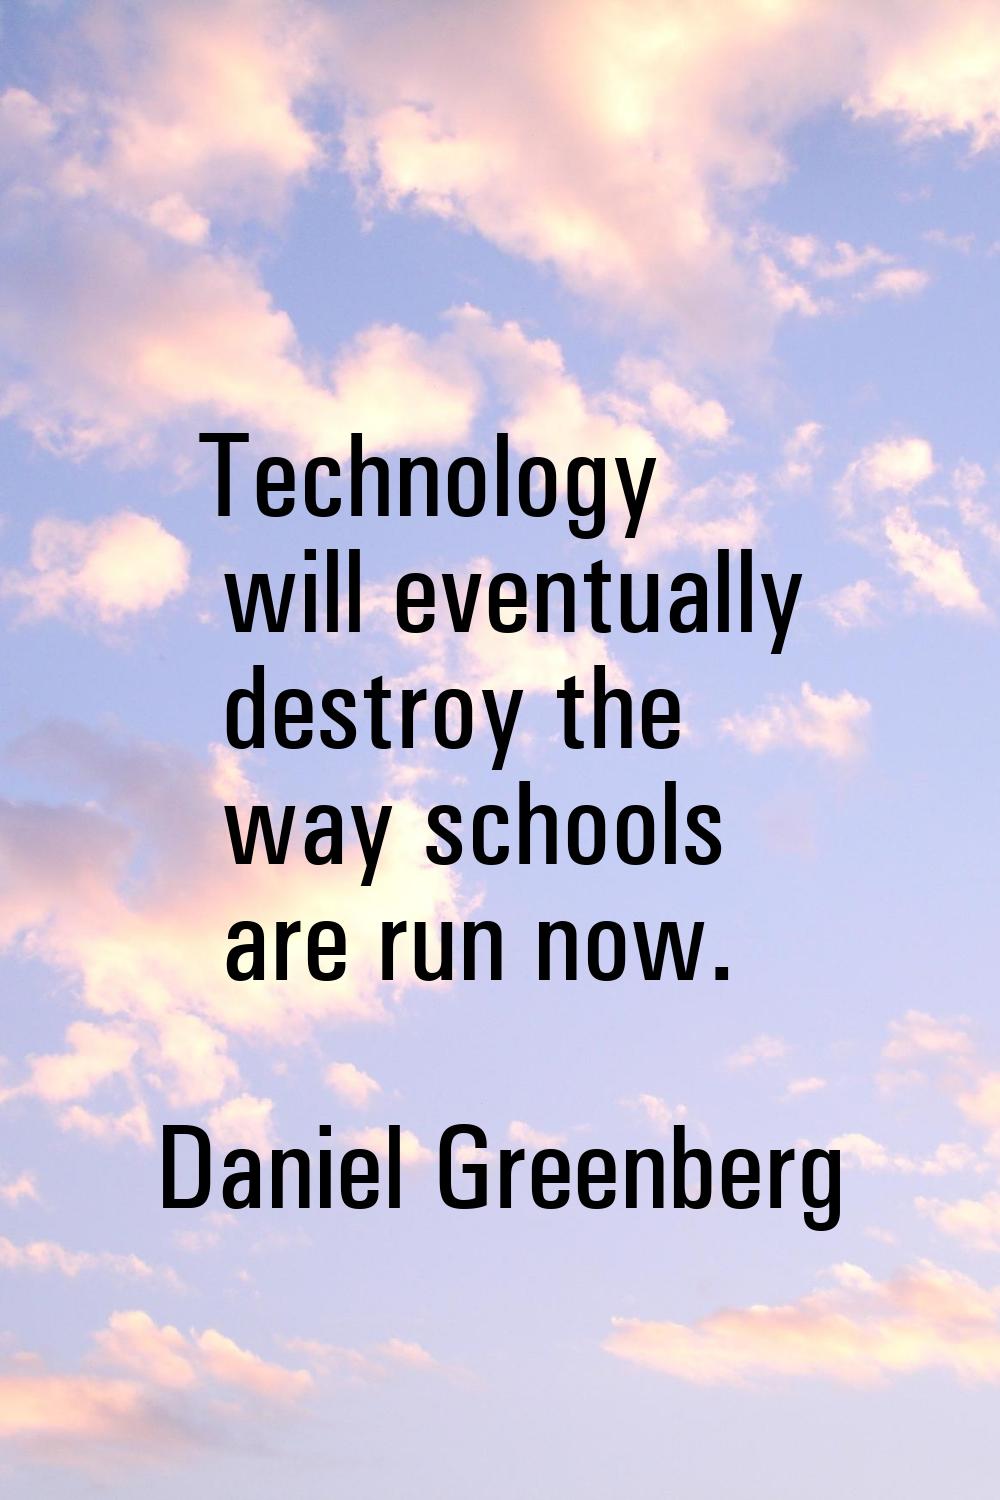 Technology will eventually destroy the way schools are run now.